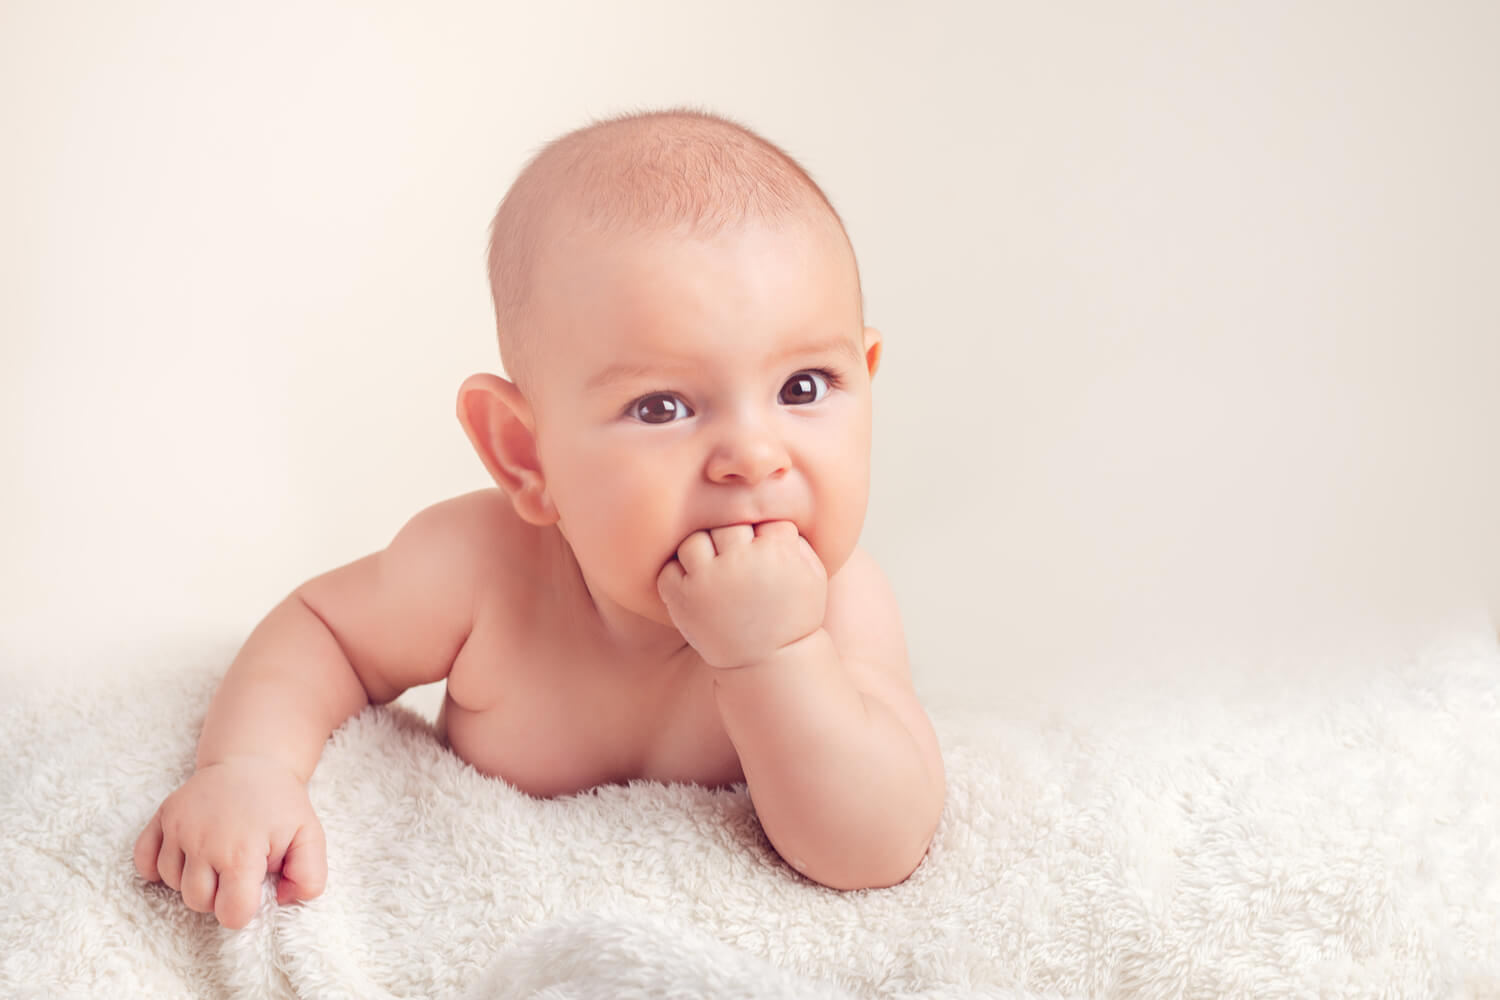 baby putting hand in mouth